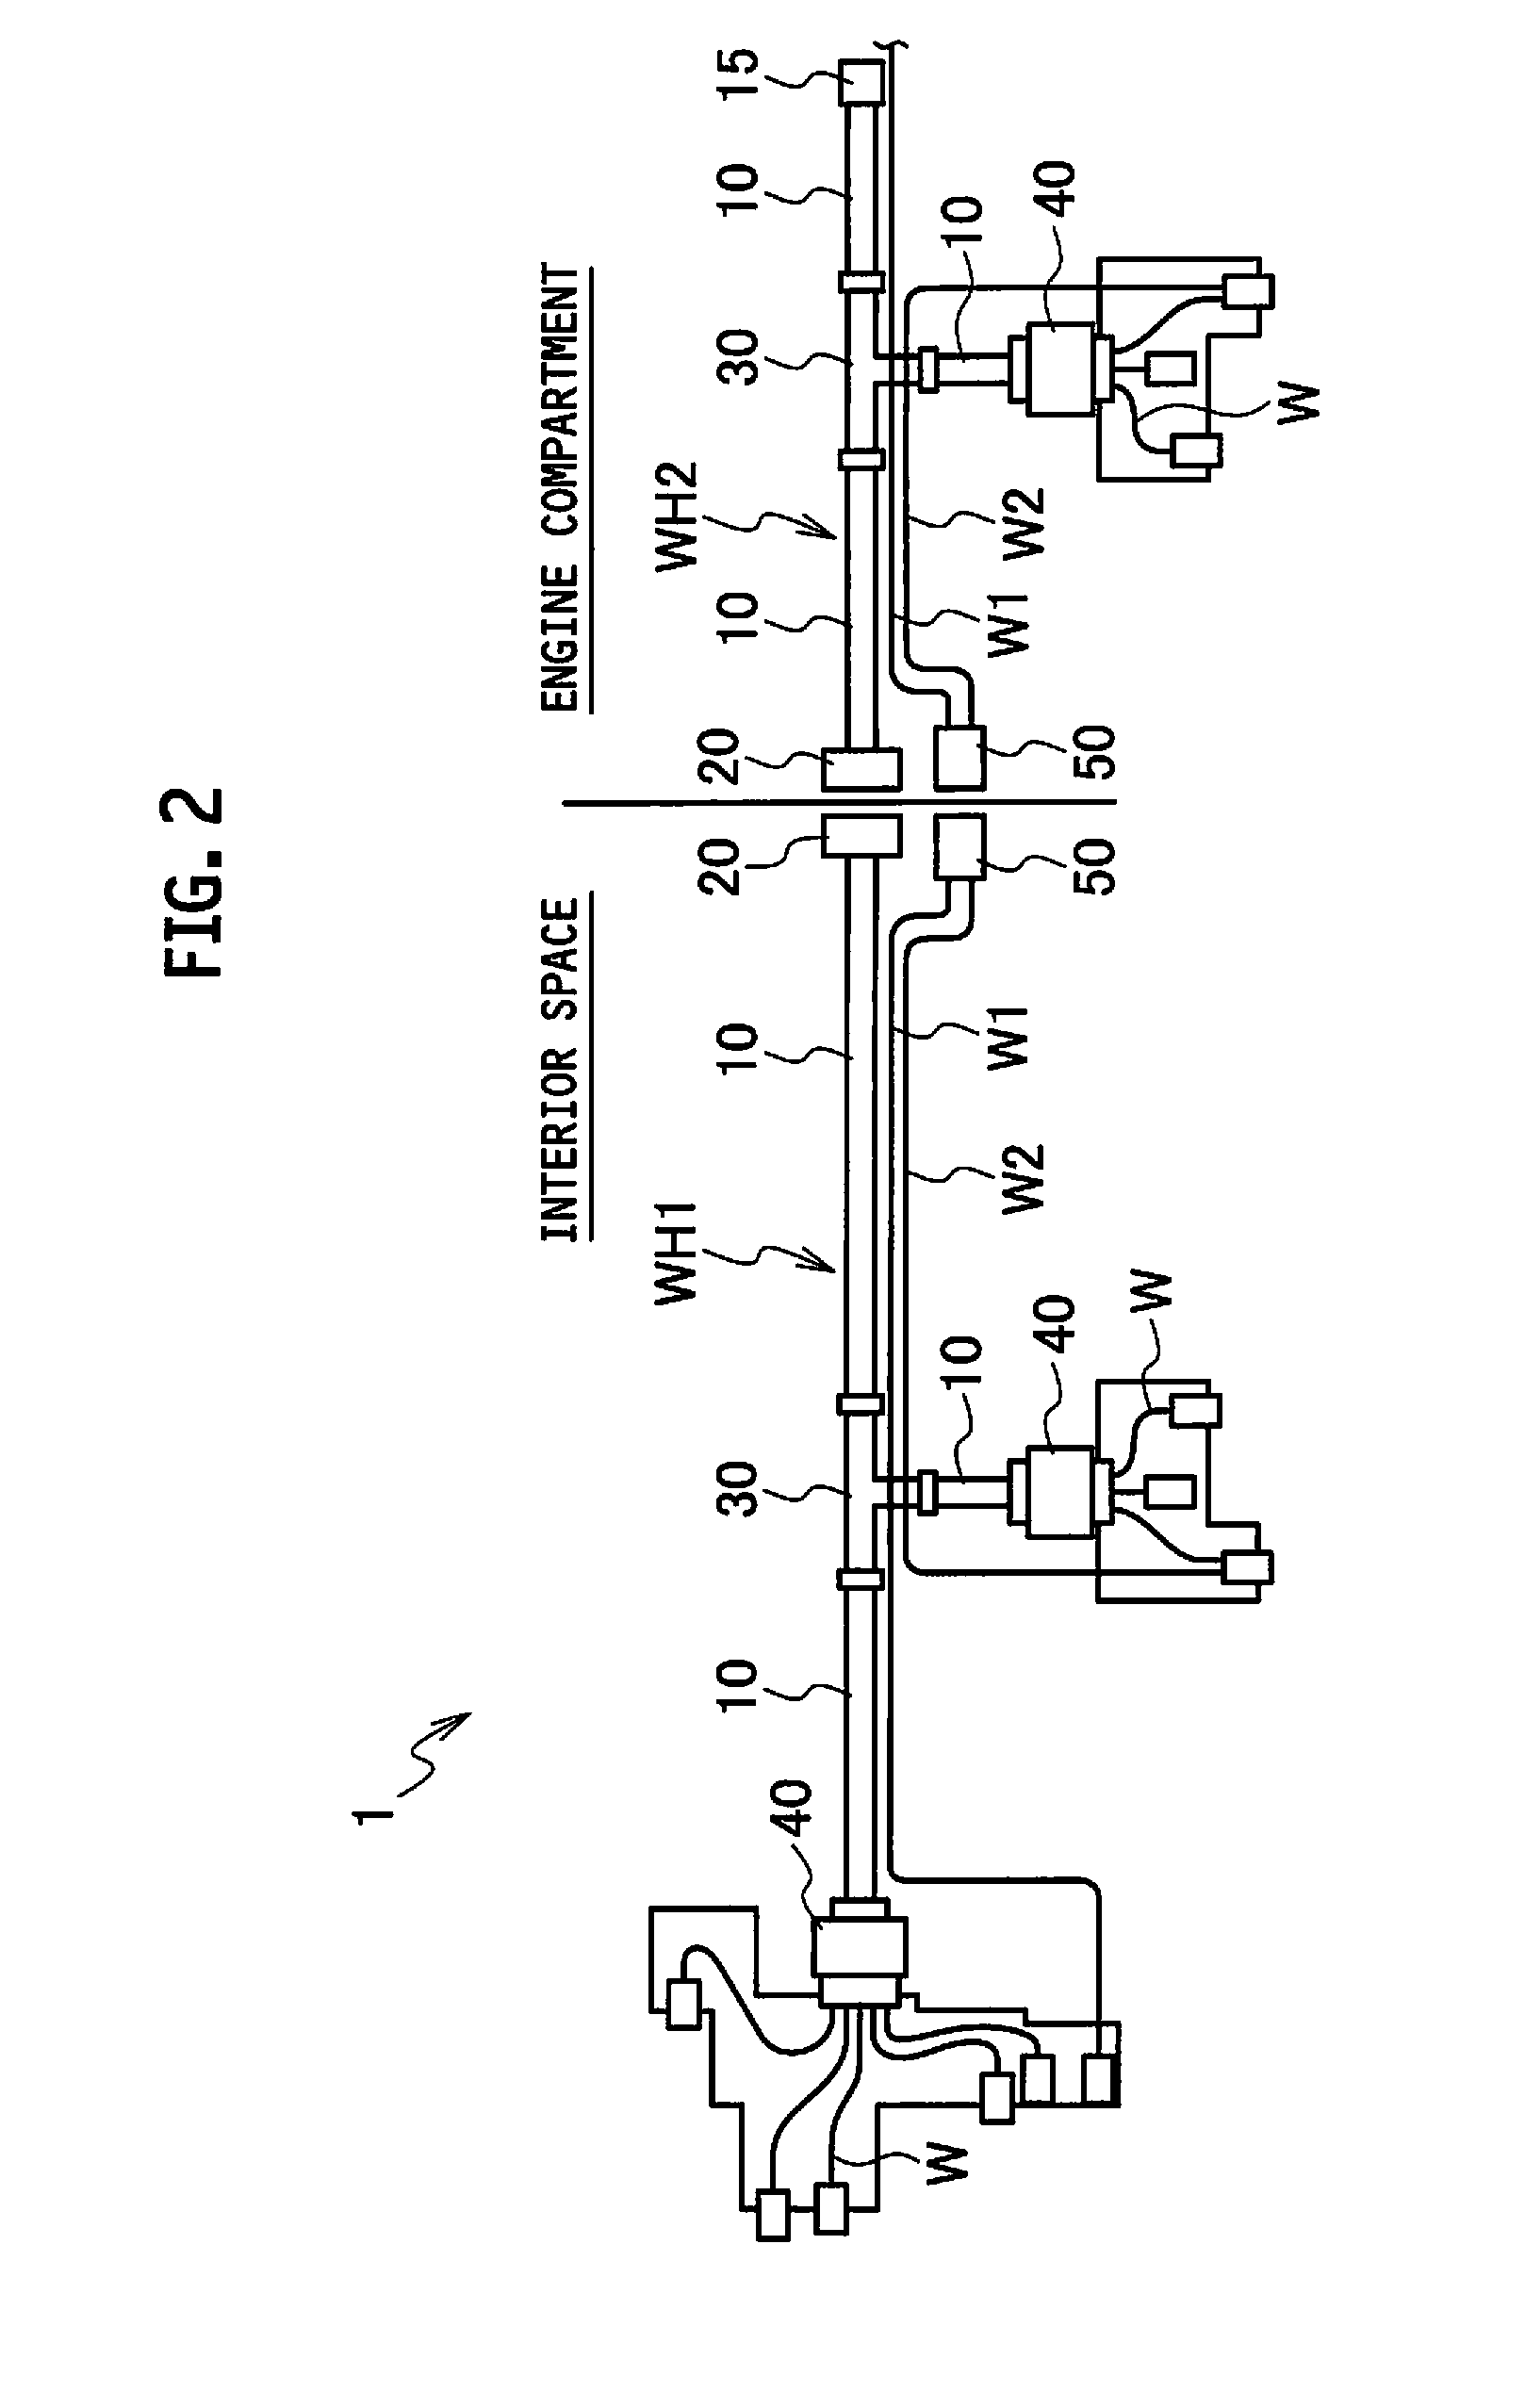 Waveguide and in-vehicle communication system